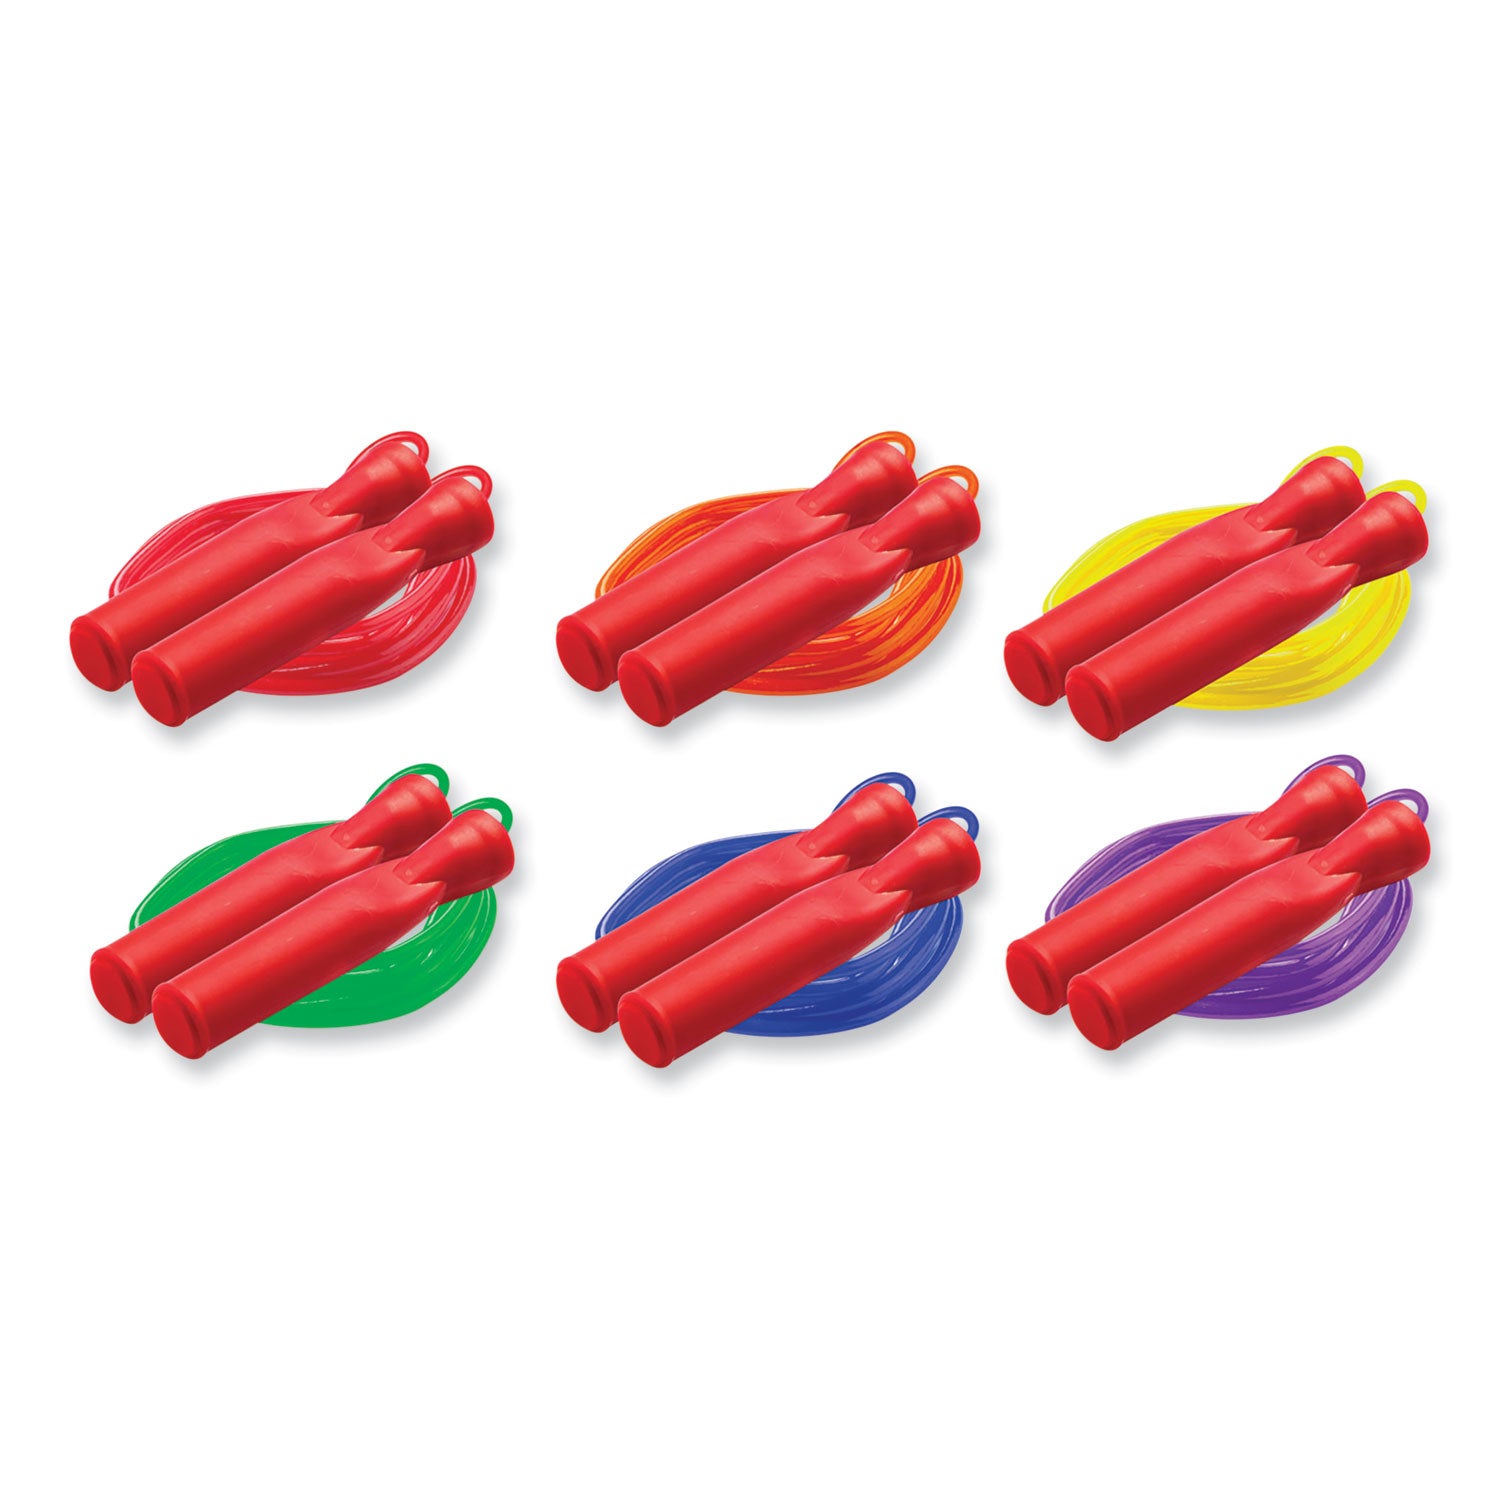 ball-bearing-speed-rope-7-ft-randomly-assorted-colors_csibsr7 - 1